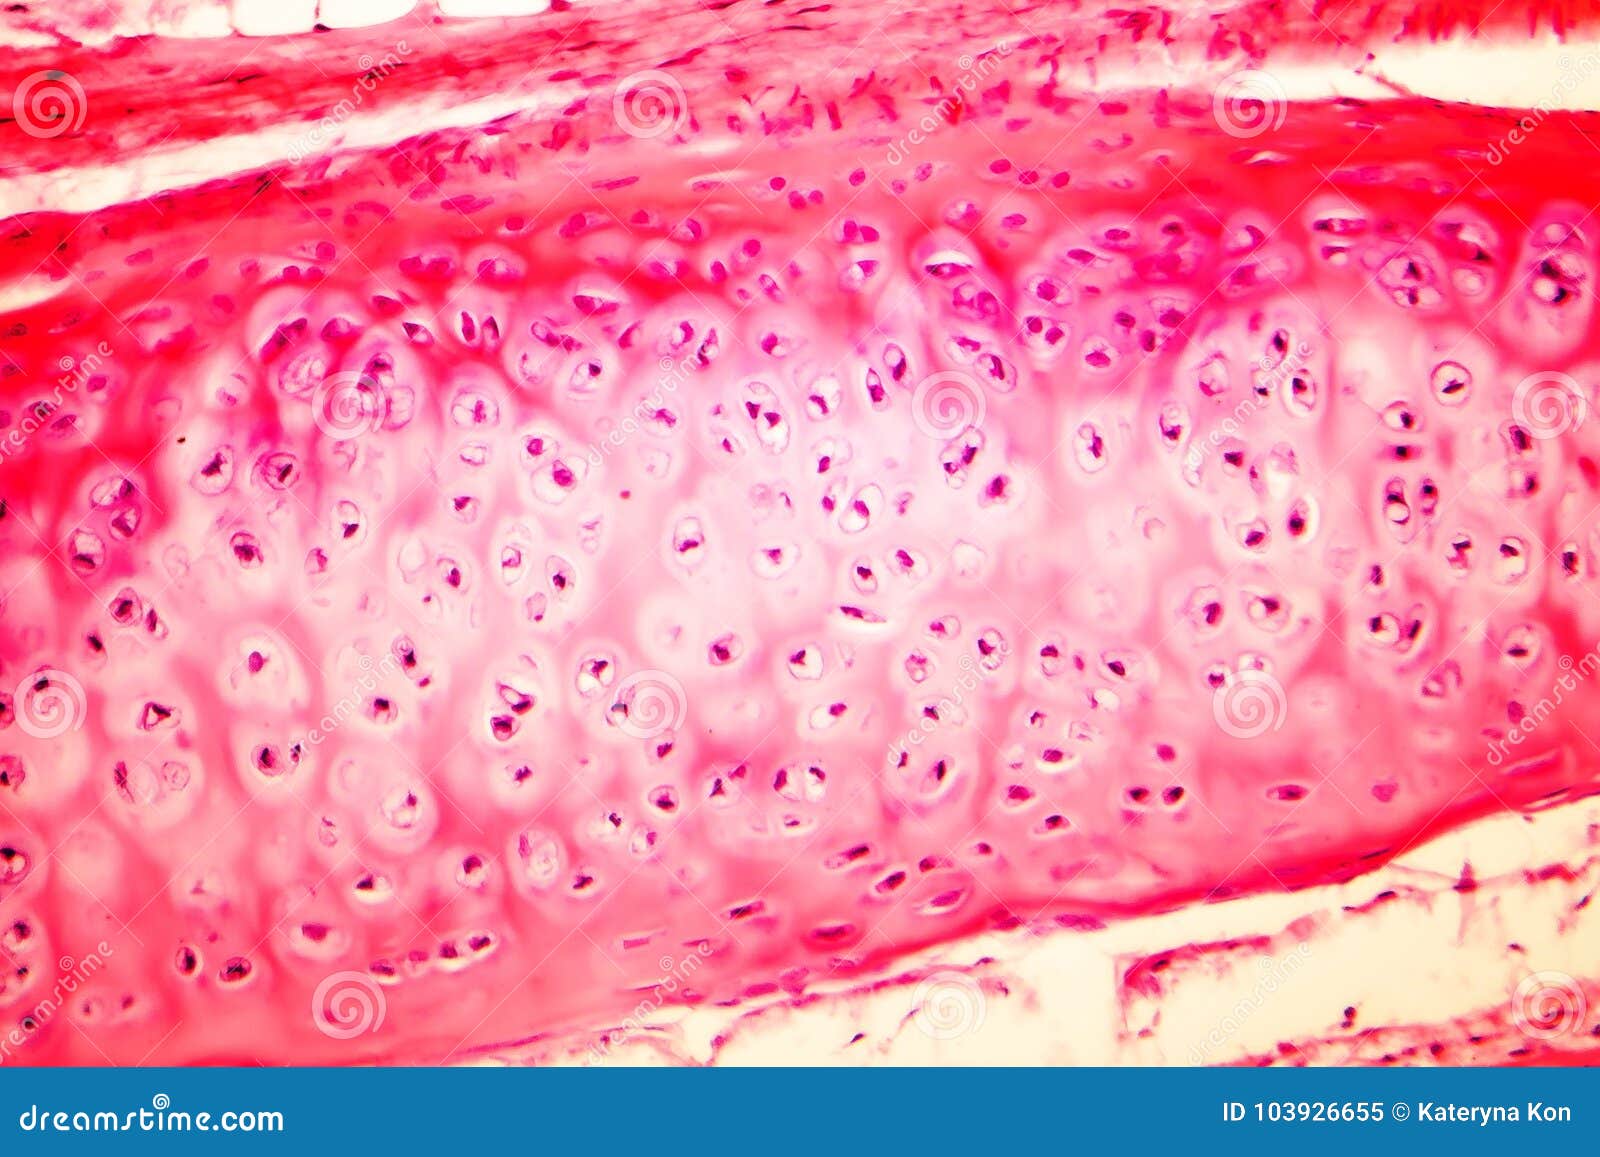 hyaline cartilage of human trachea